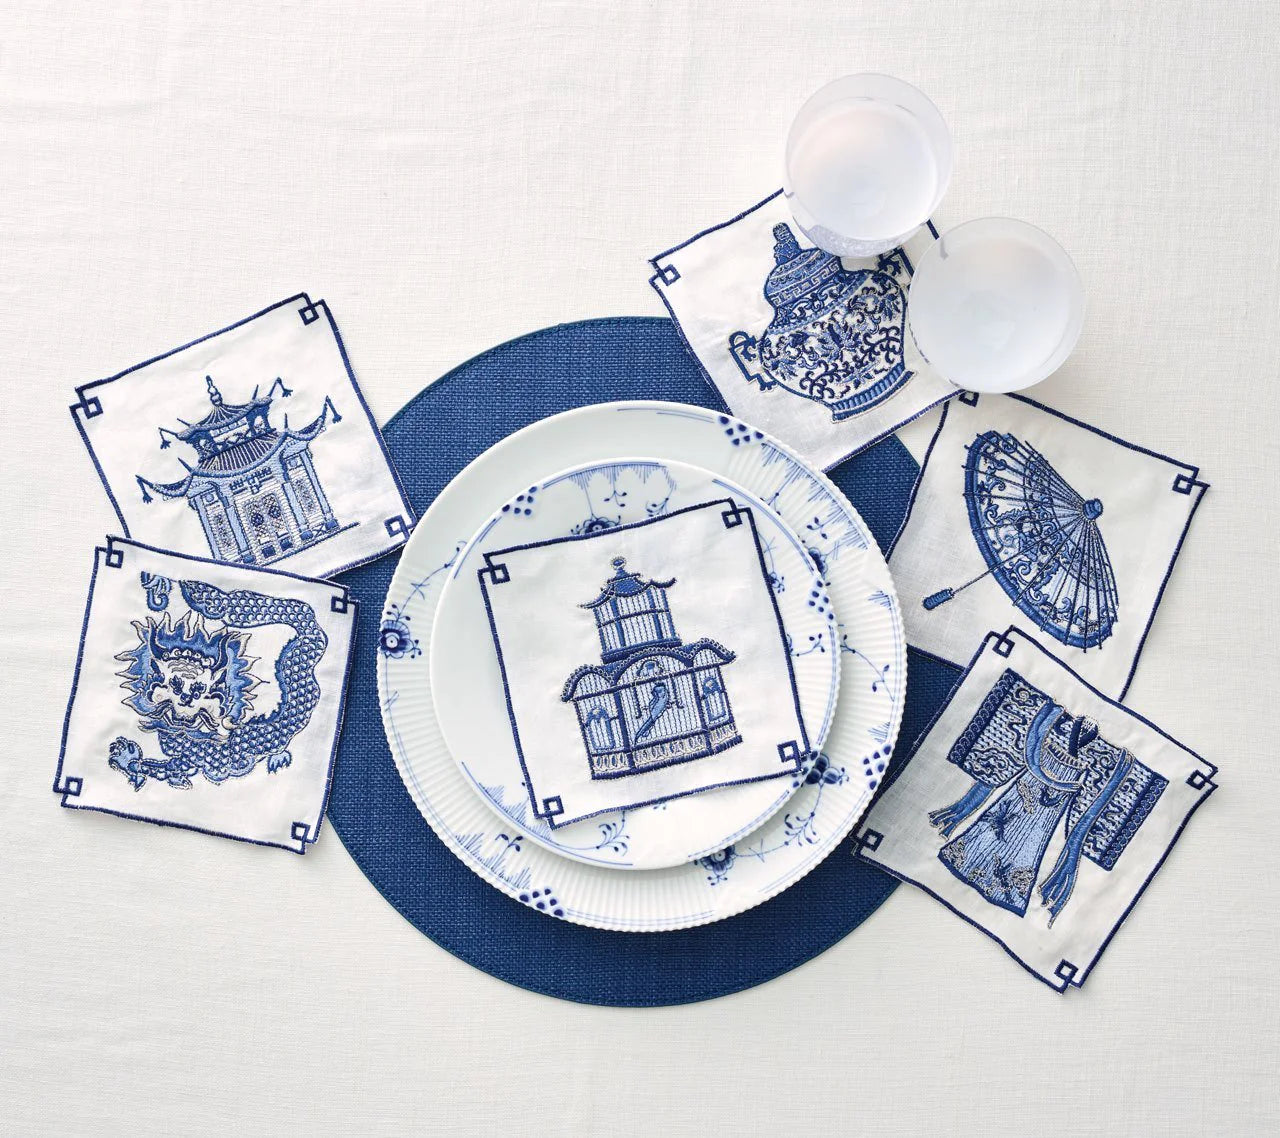 Indochine Cocktail Napkins in White & Blue, Set of 6 in a Gift Box